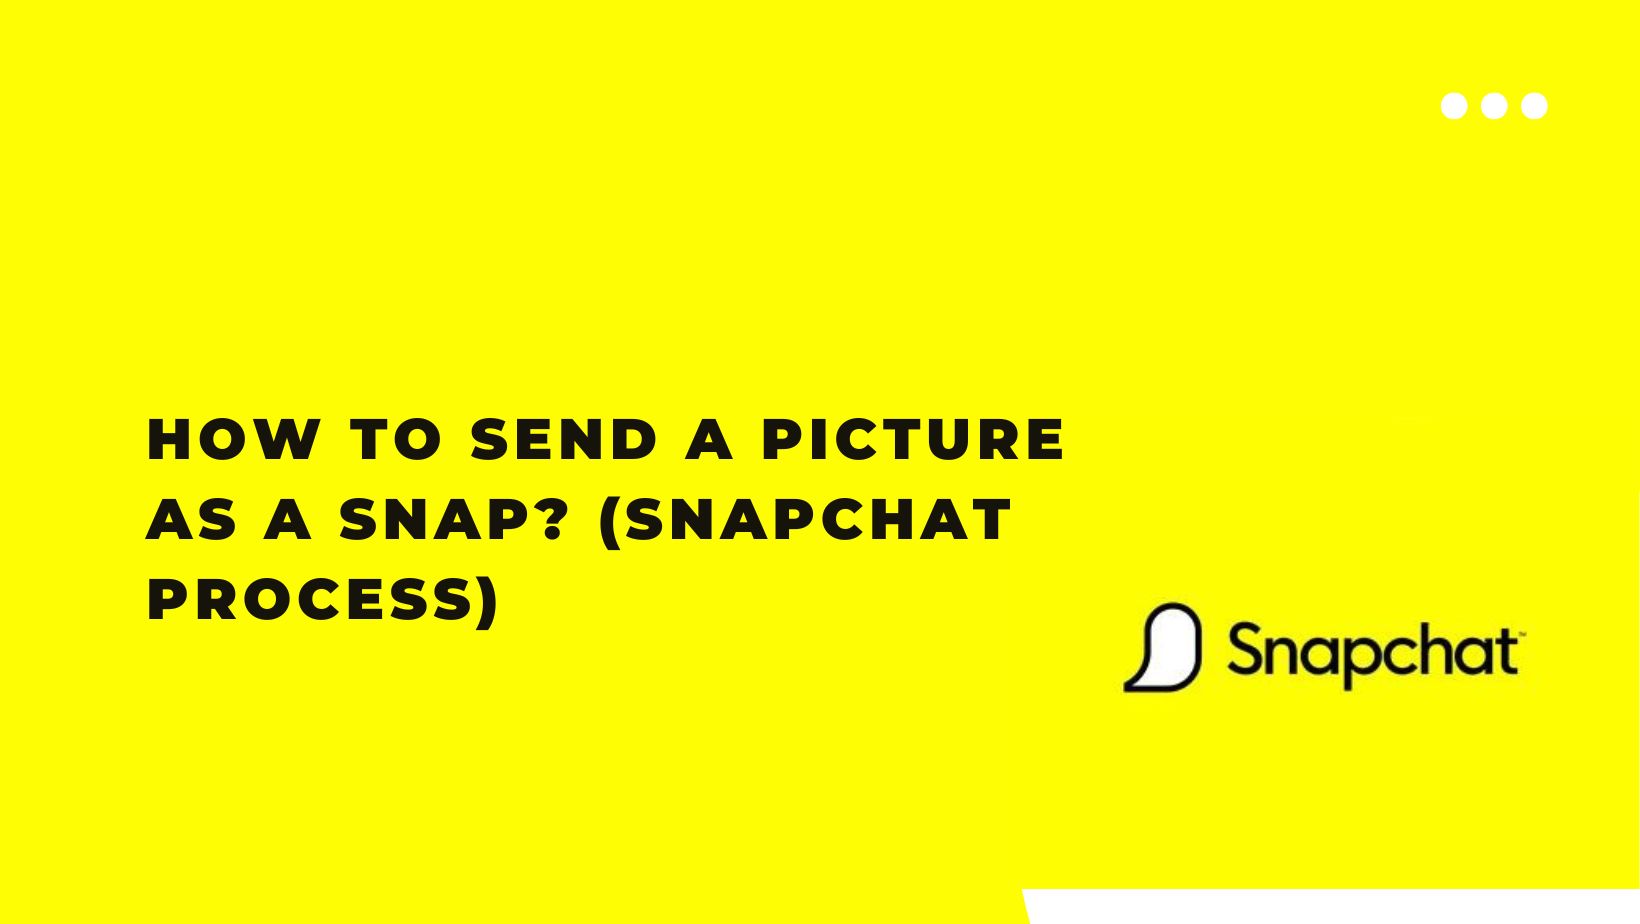 How to Send a Picture as a Snap? 